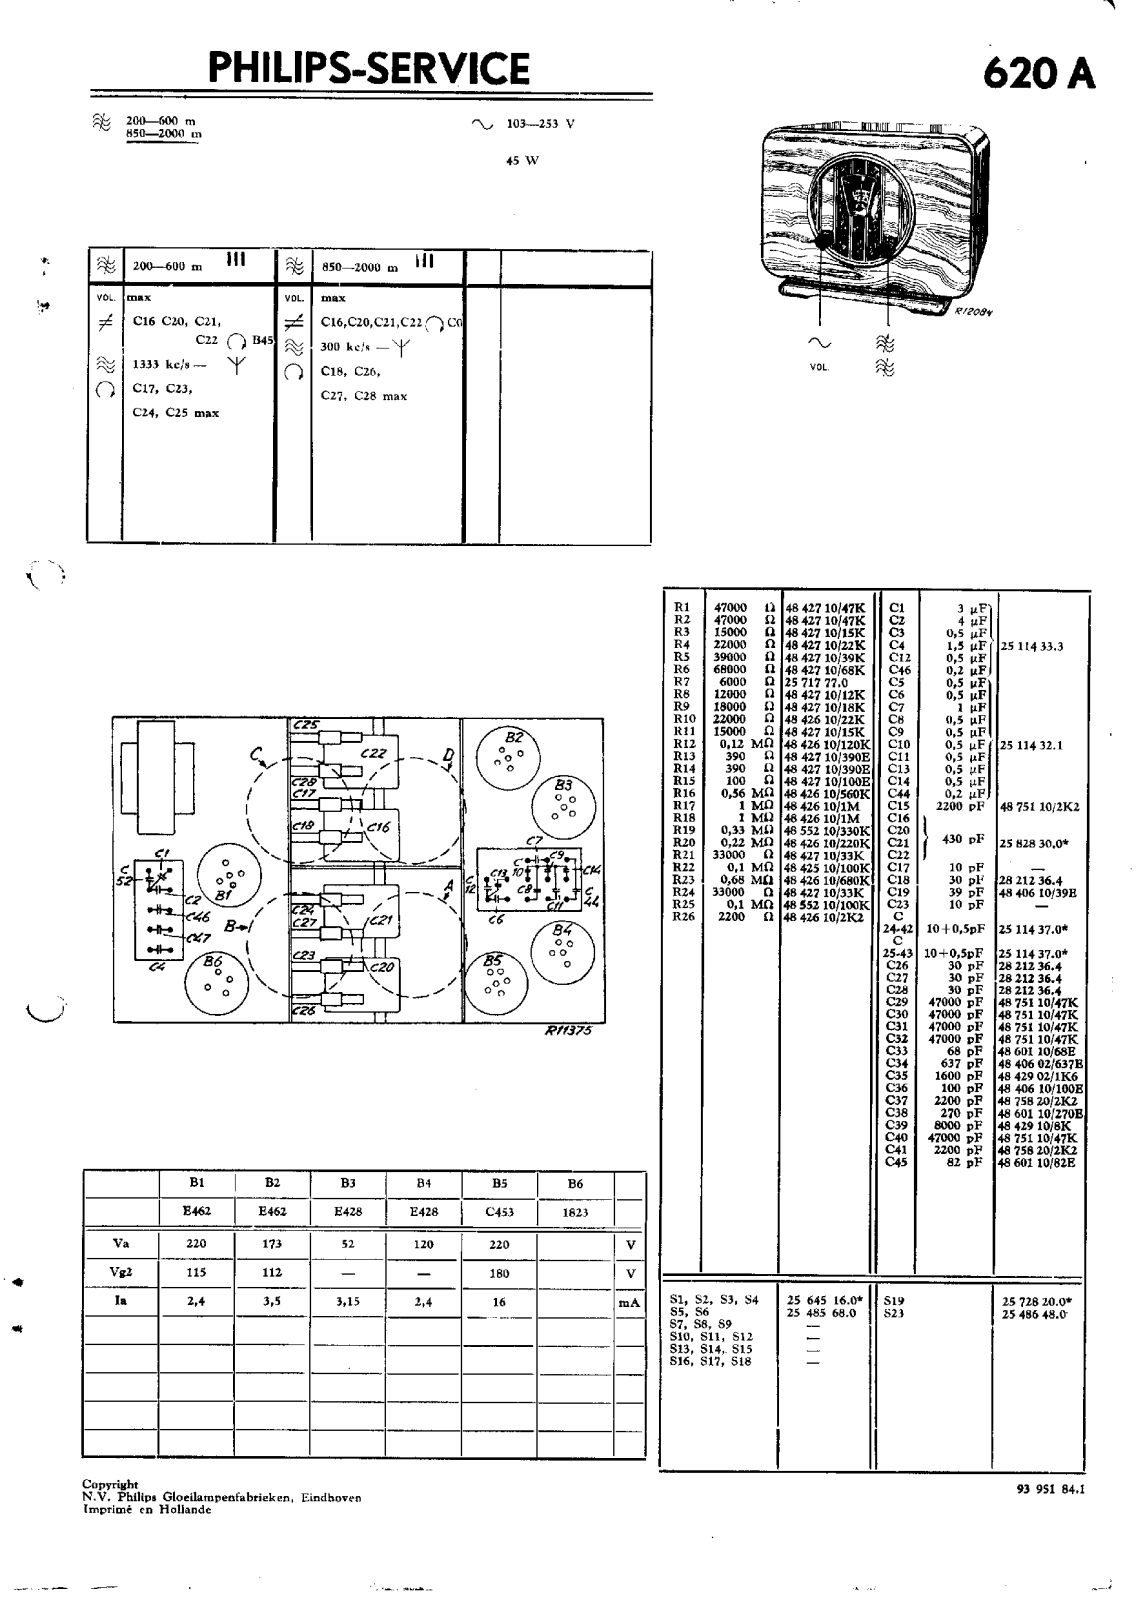 Philips 620-A Service Manual